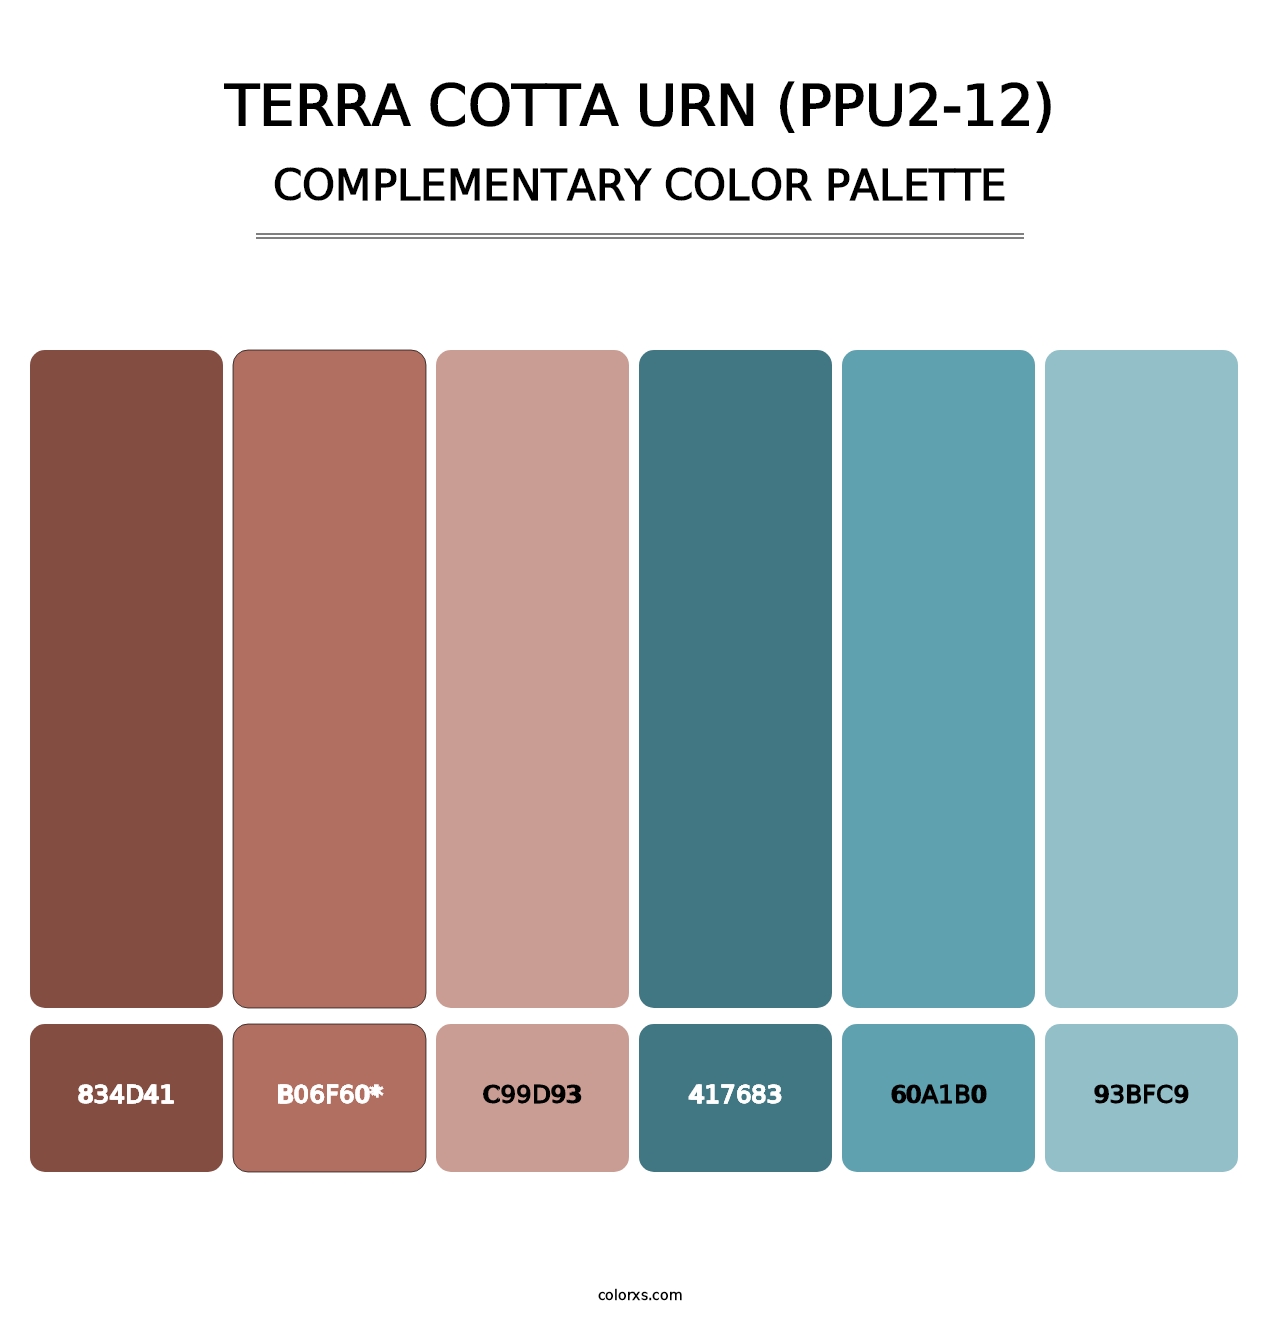 Terra Cotta Urn (PPU2-12) - Complementary Color Palette